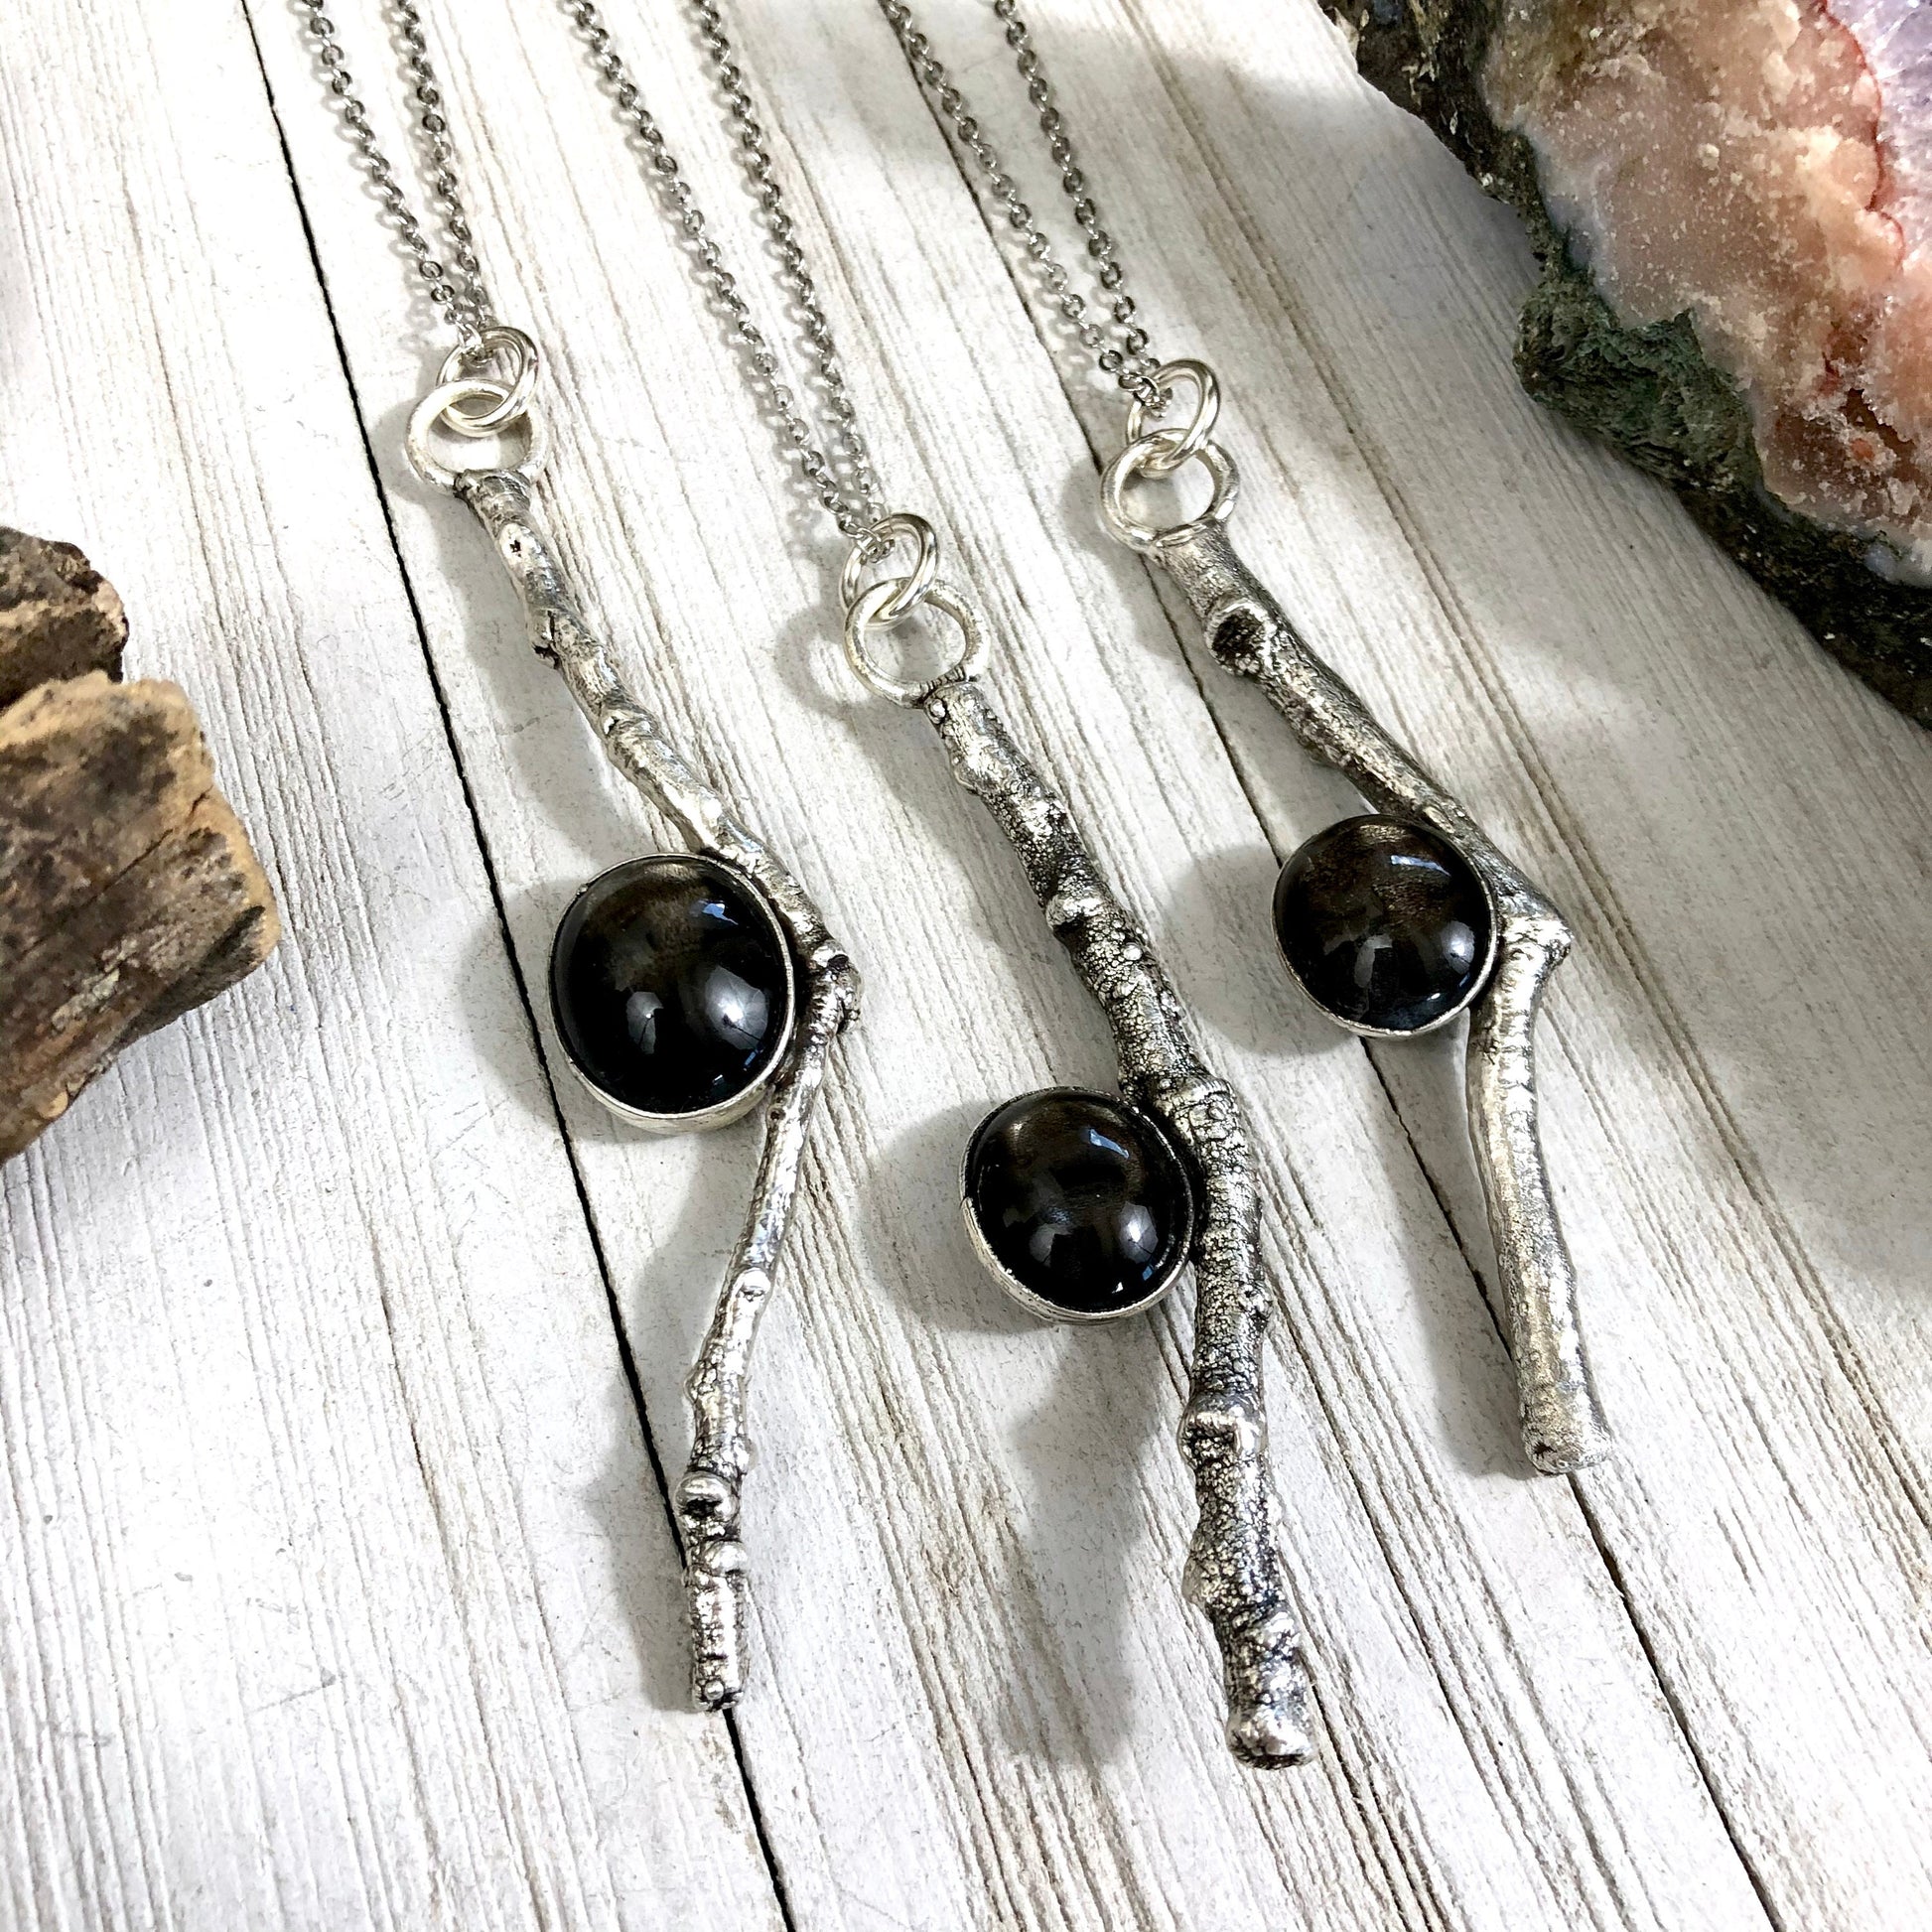 big crystal Necklace, Big Gothic Necklace, Big Silver Necklace, Big Stone Necklace, Black Star sunstone, Bohemian Jewelry, Crystal Necklaces, Crystal Pendant, Etsy ID: 1100791057, FOXLARK- NECKLACES, Jewelry, nature inspired, Necklaces, sale, Silver Sheen